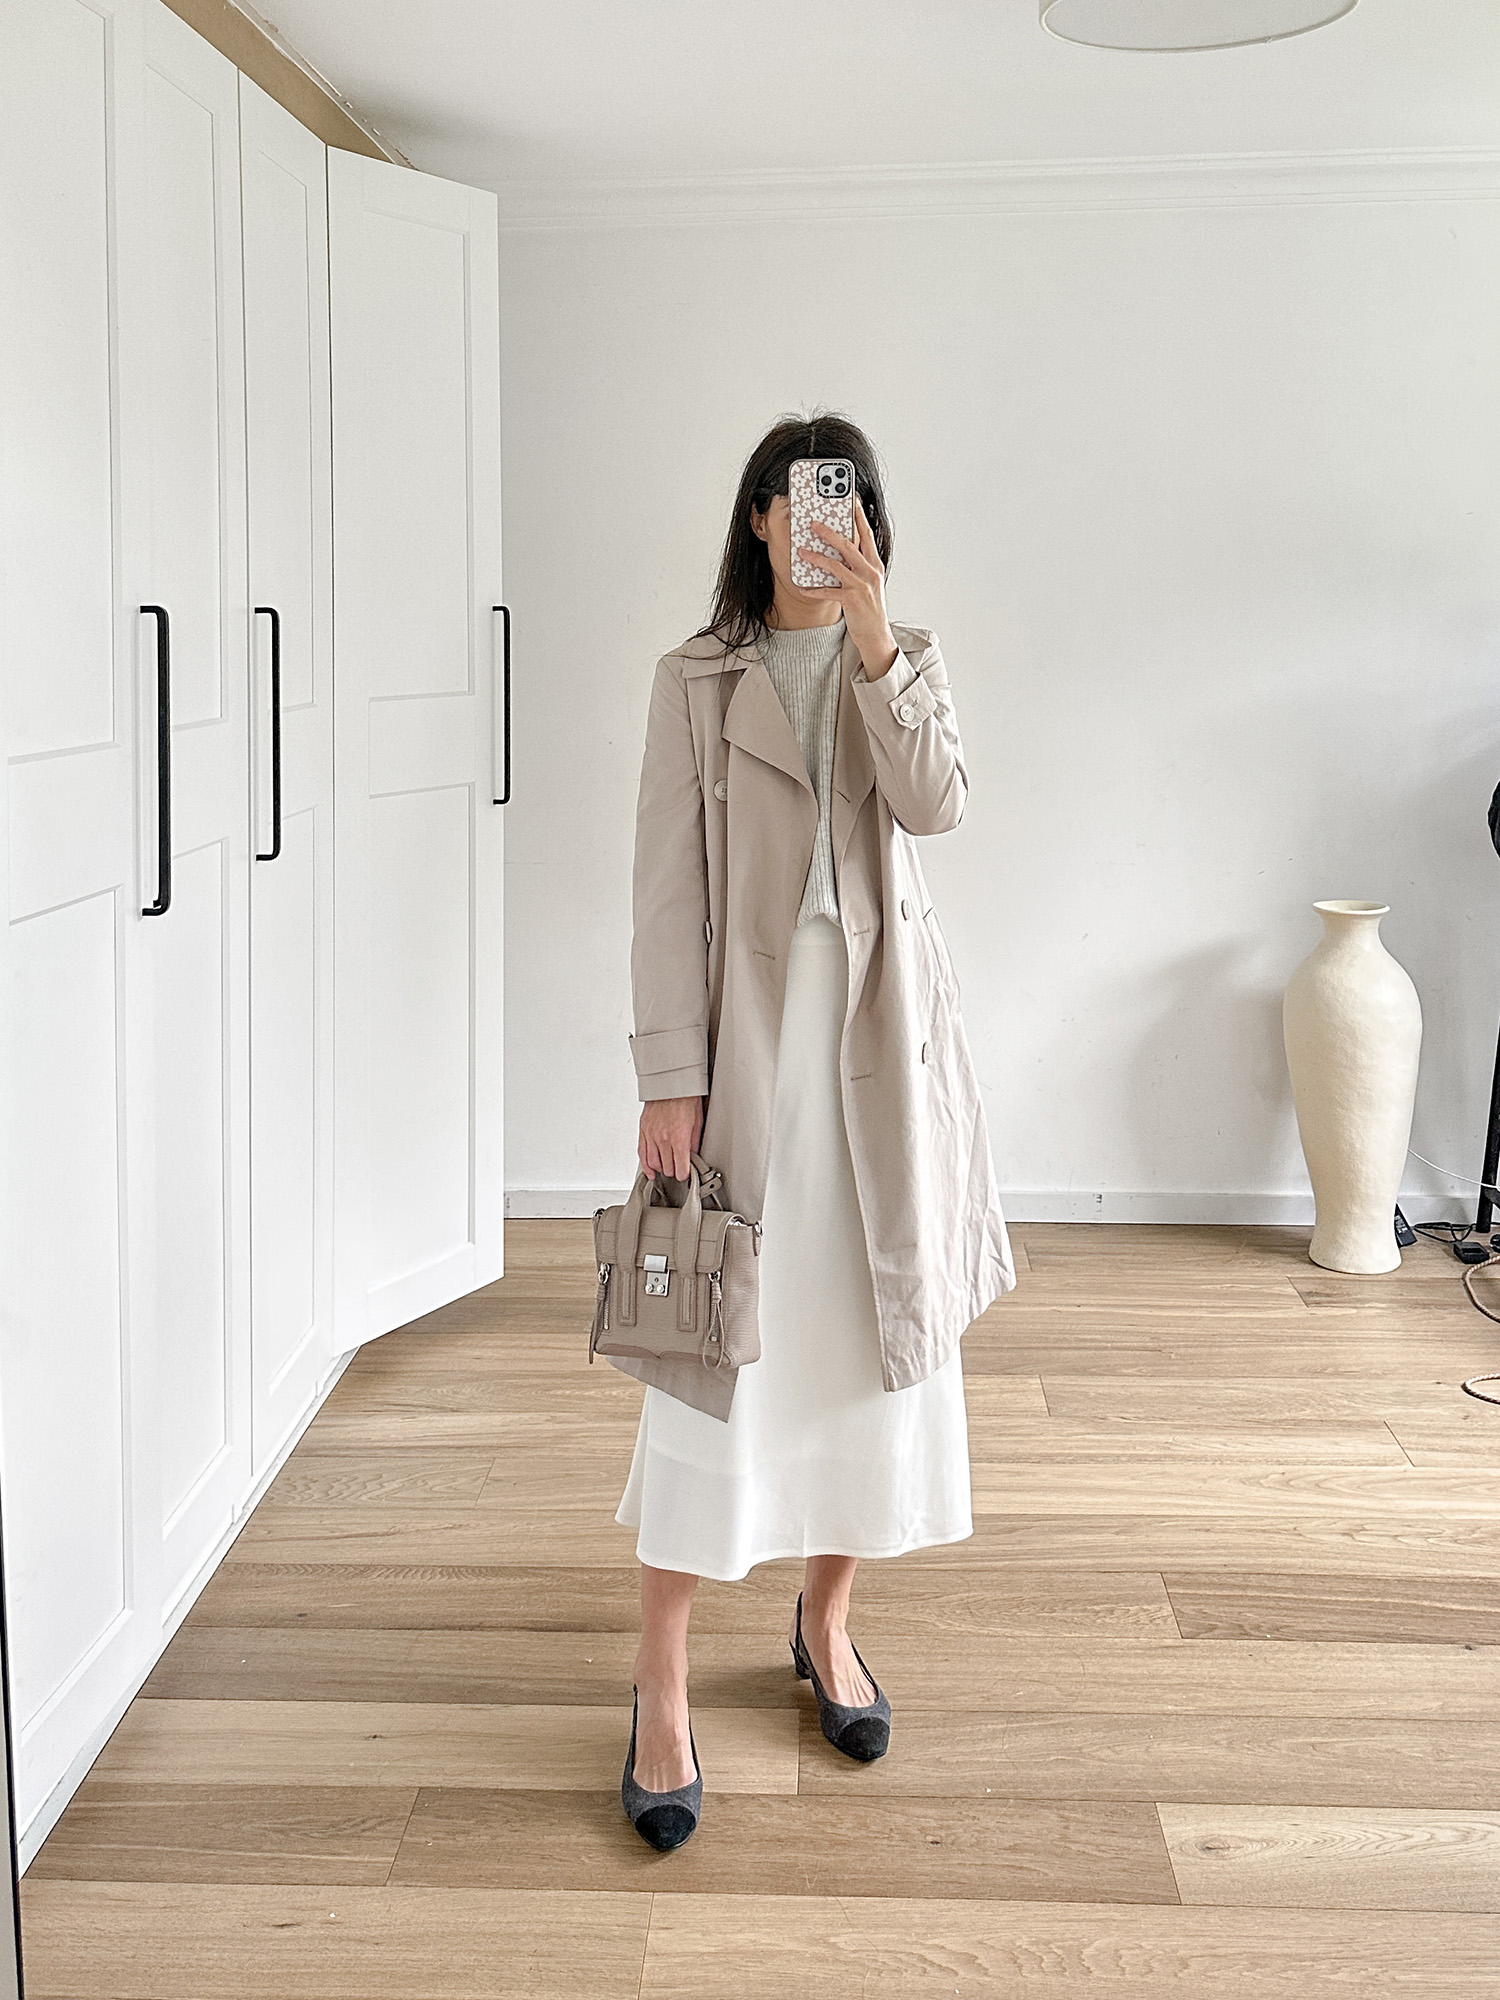 How to Style a Trench Coat: 6 Outfit Ideas